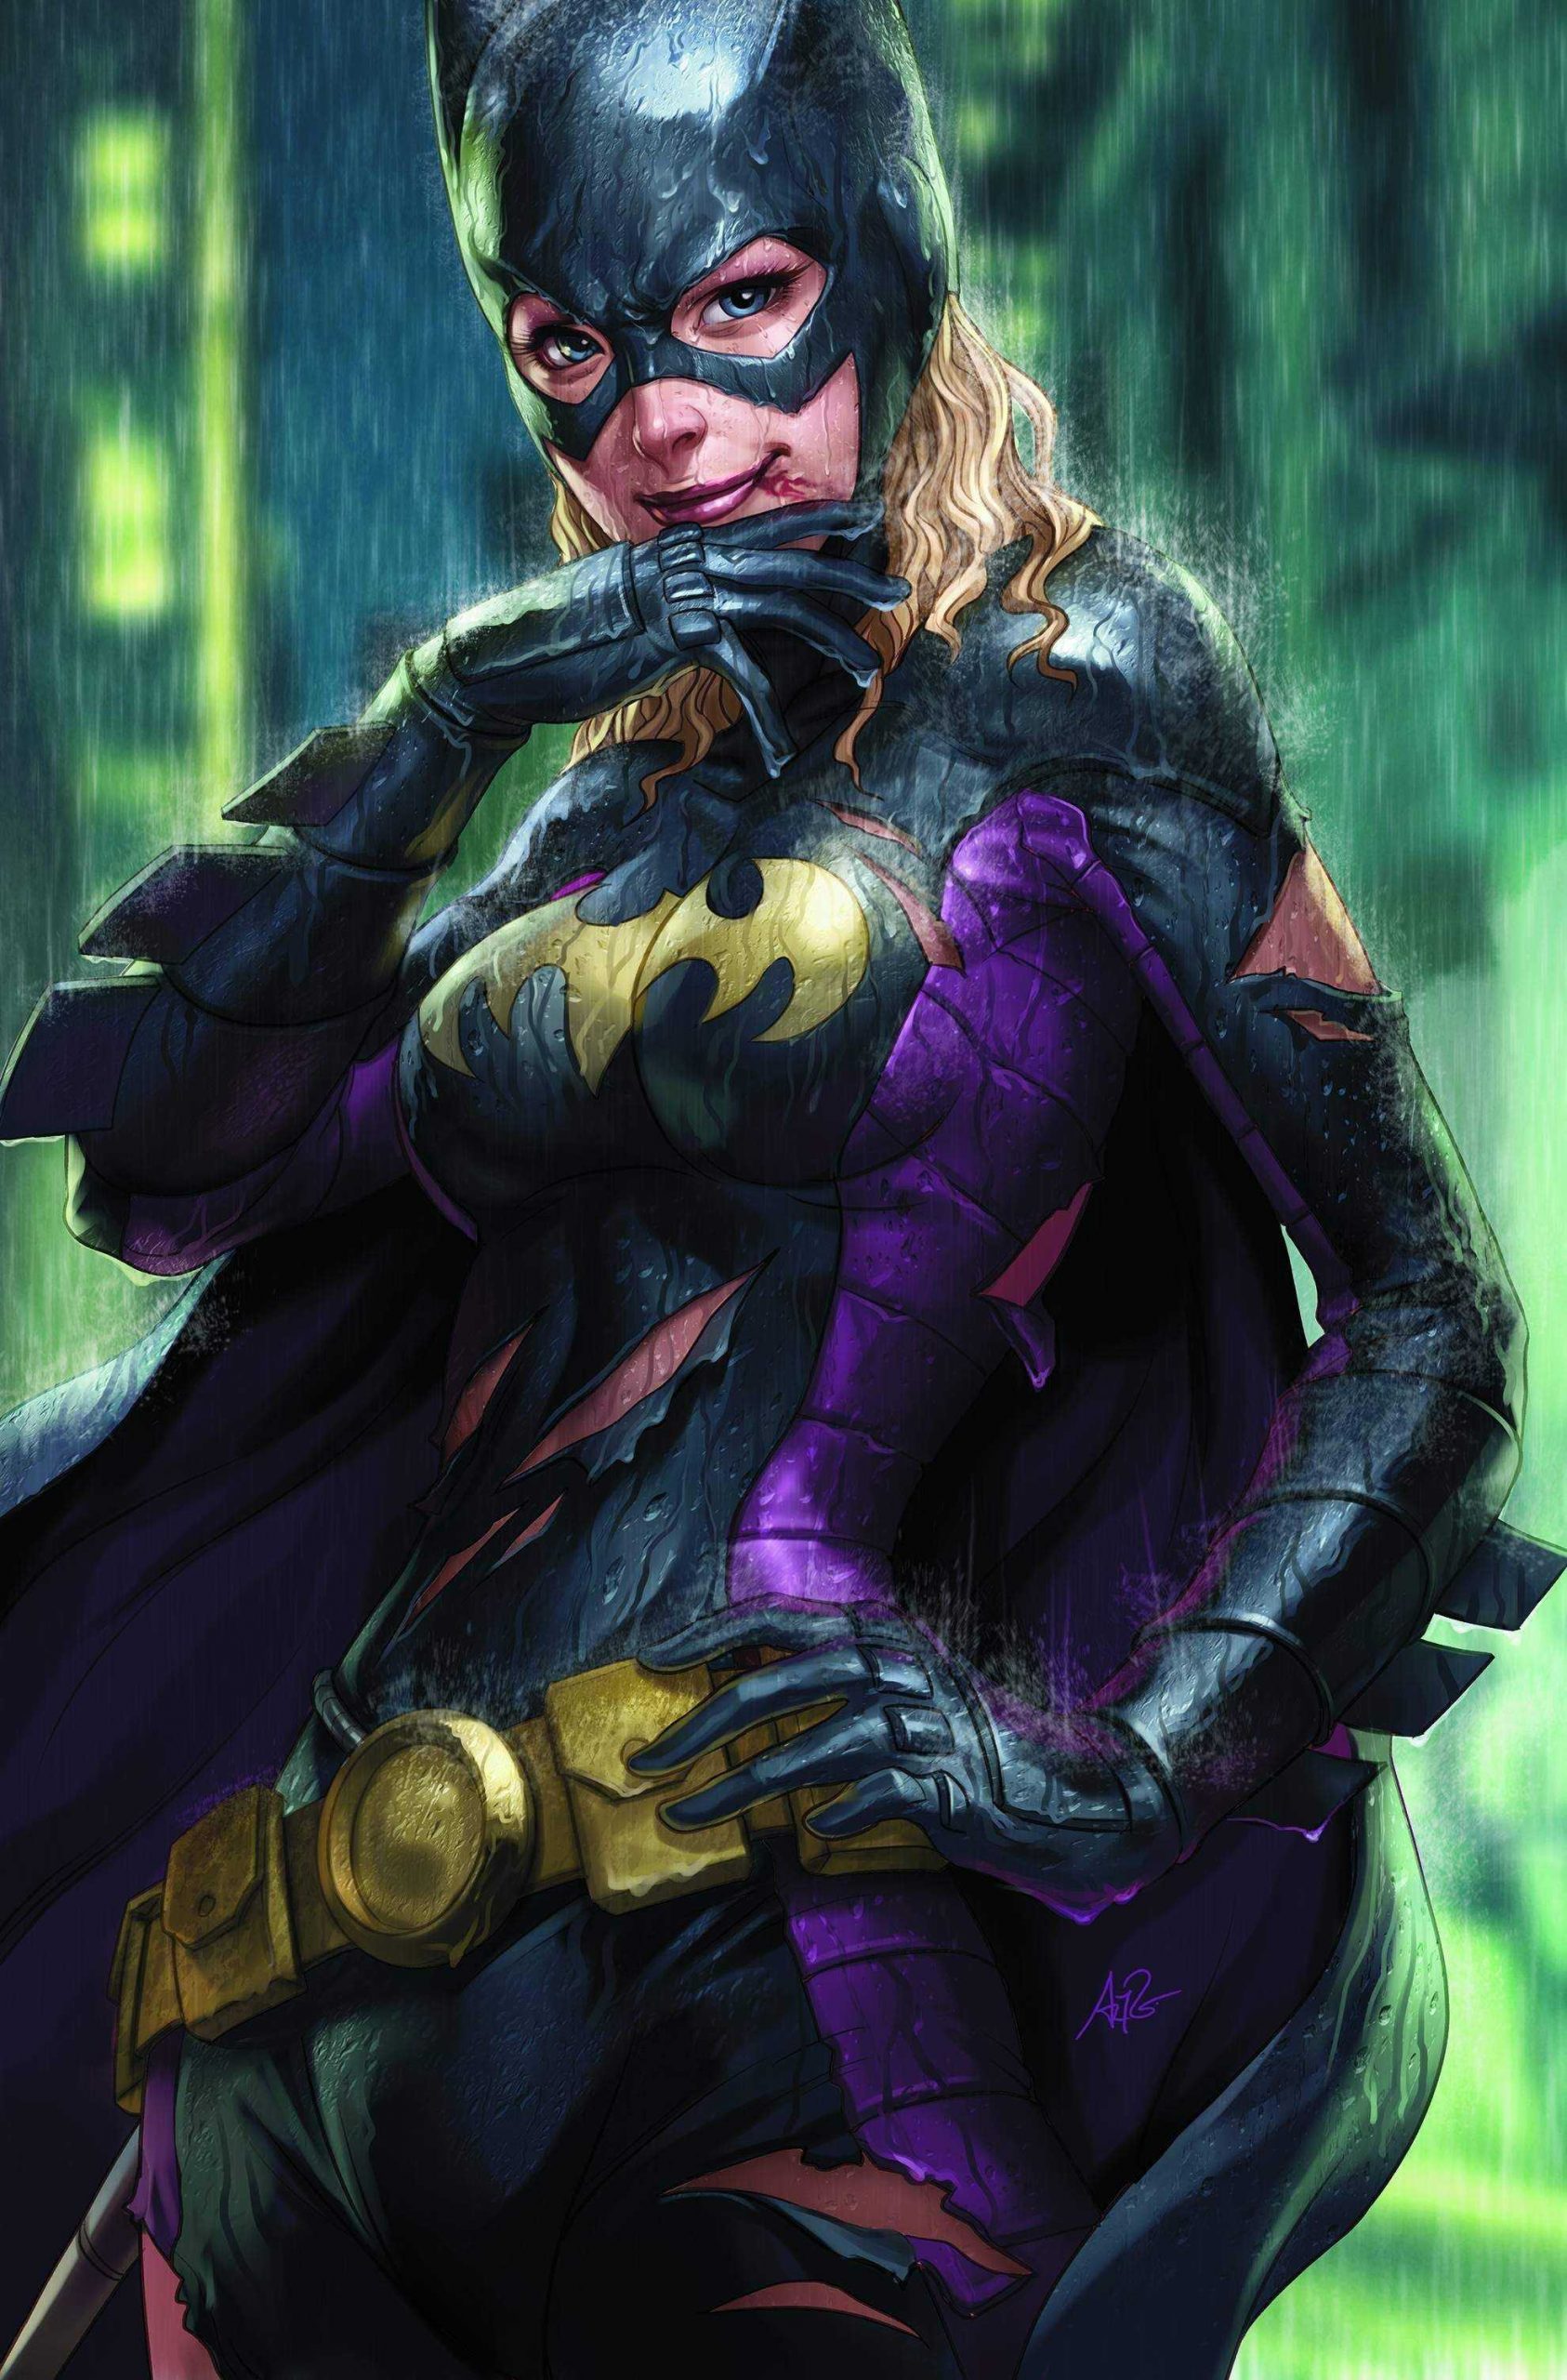 Hot Picture Of Stephanie Brown That Will Make Your Heart Pound For Her